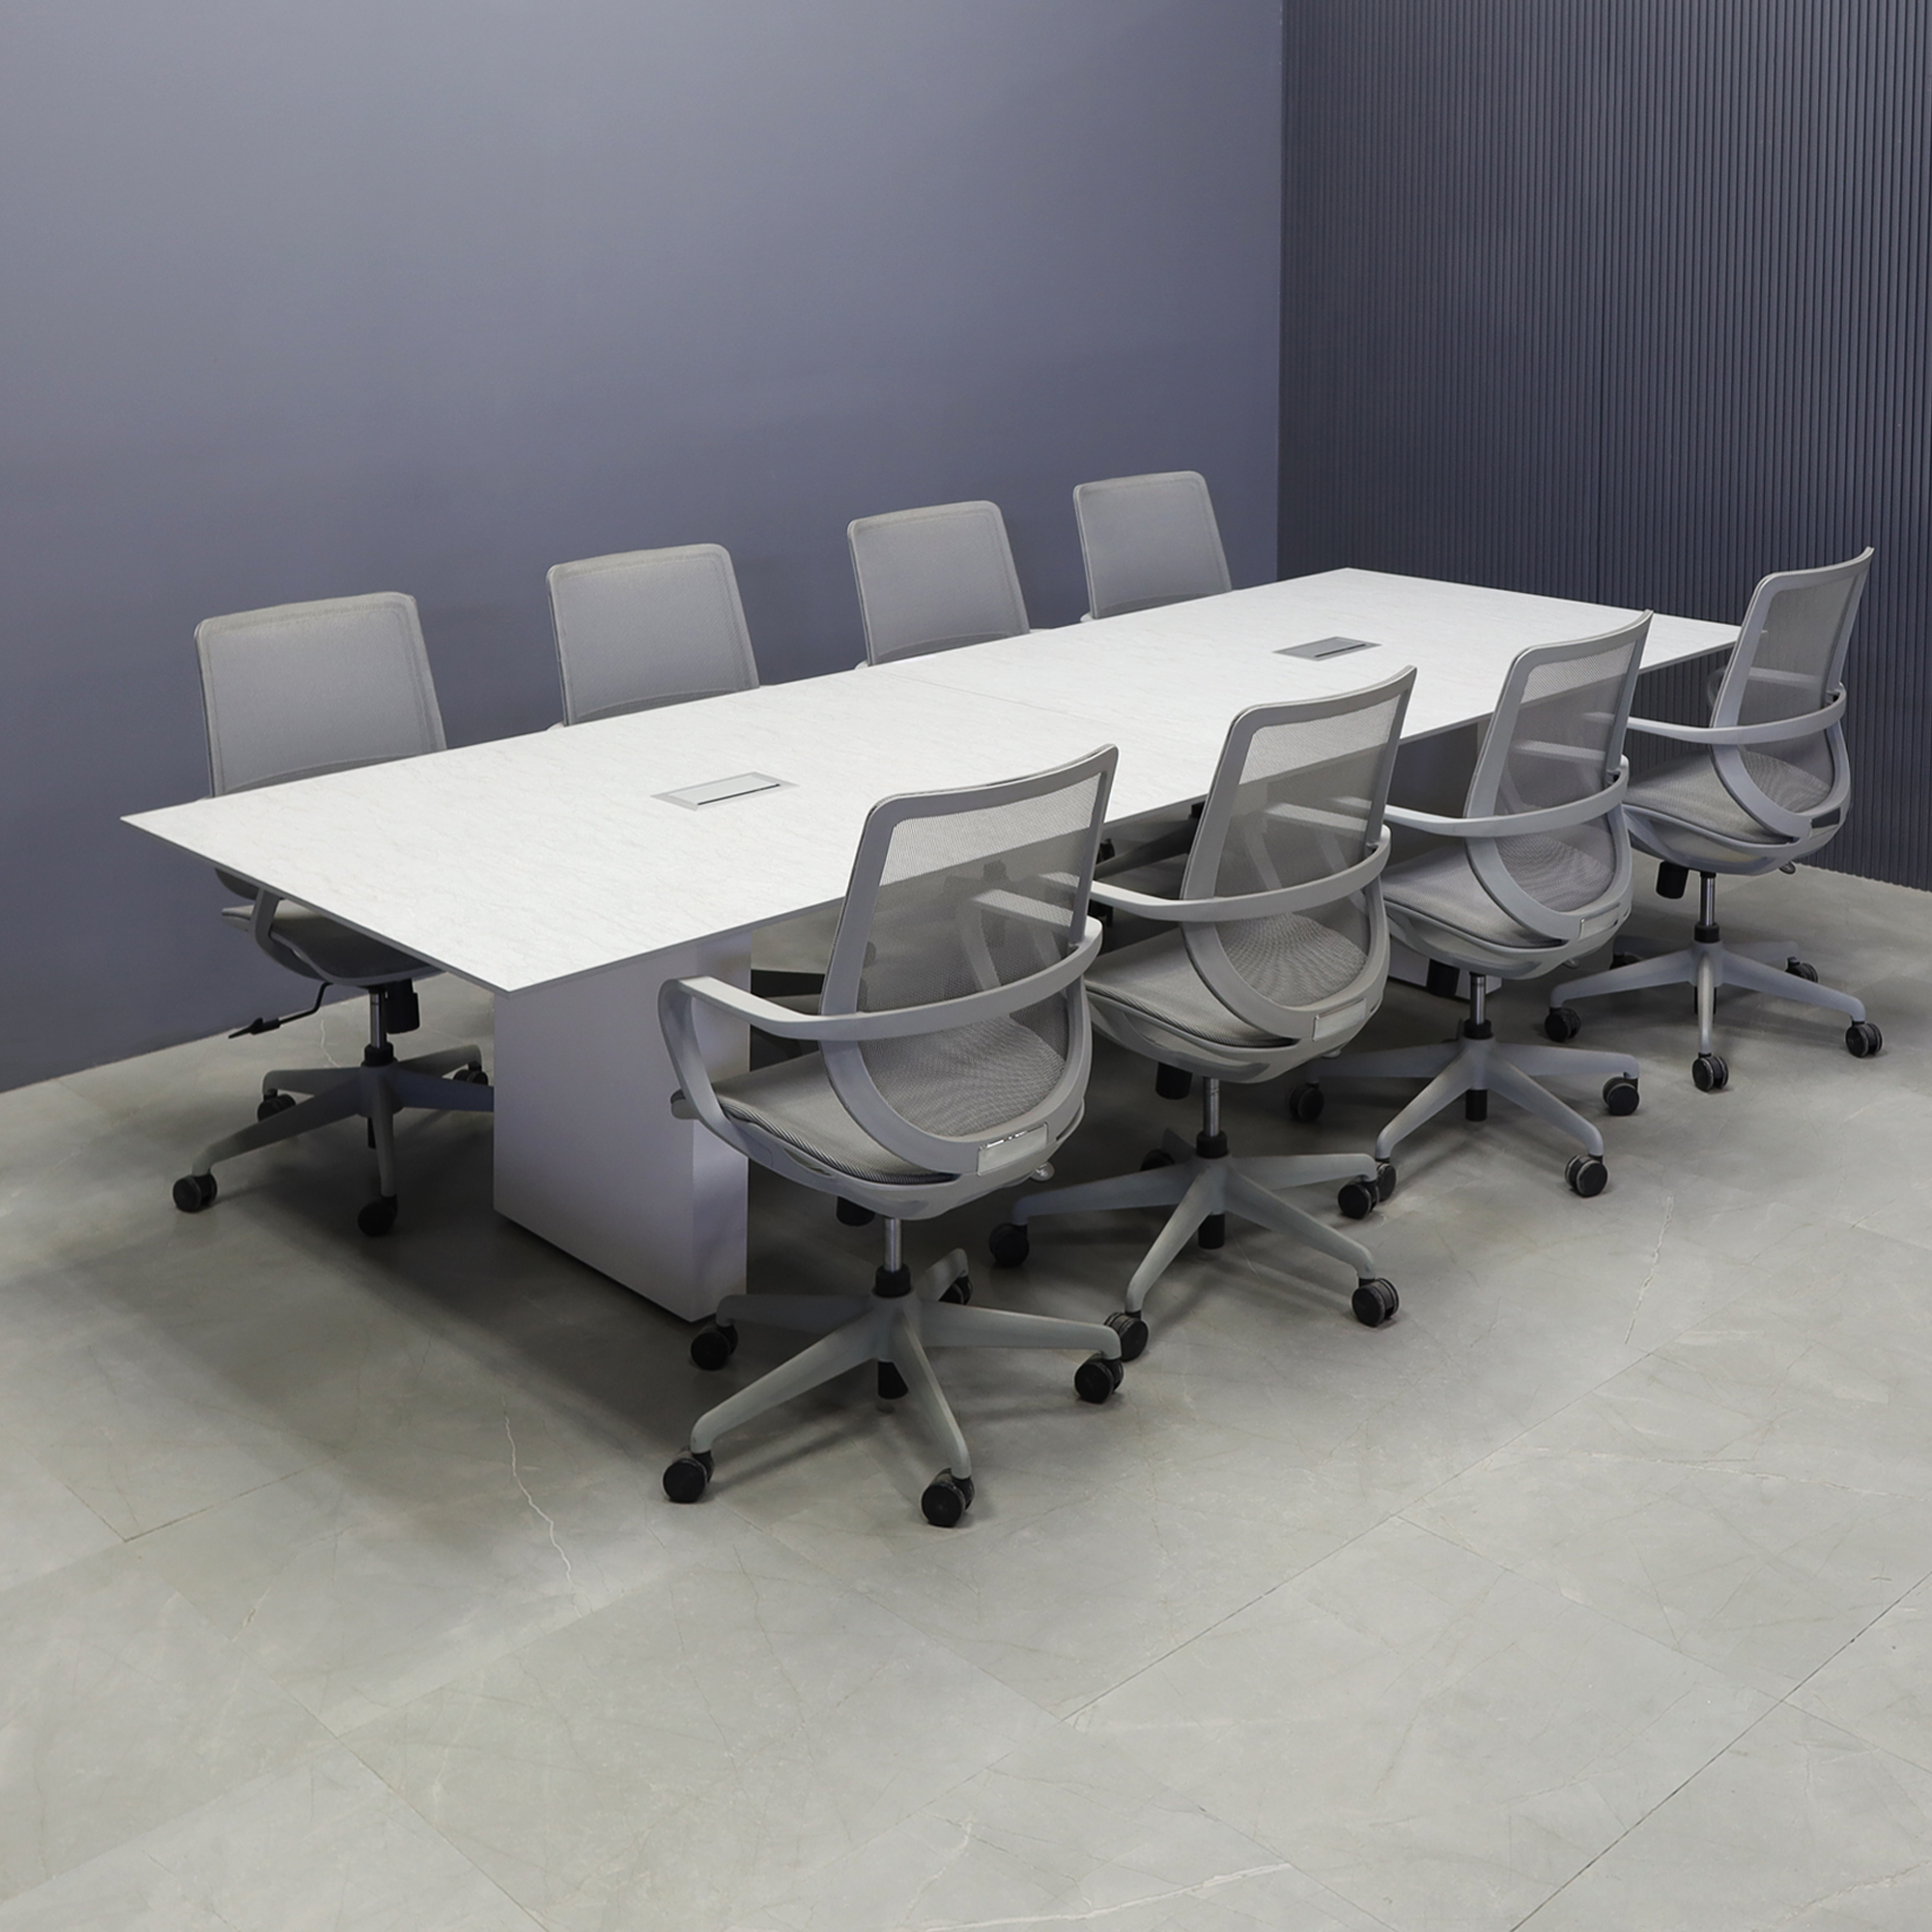 120-inch Aurora Rectangular Conference Table in 1/2